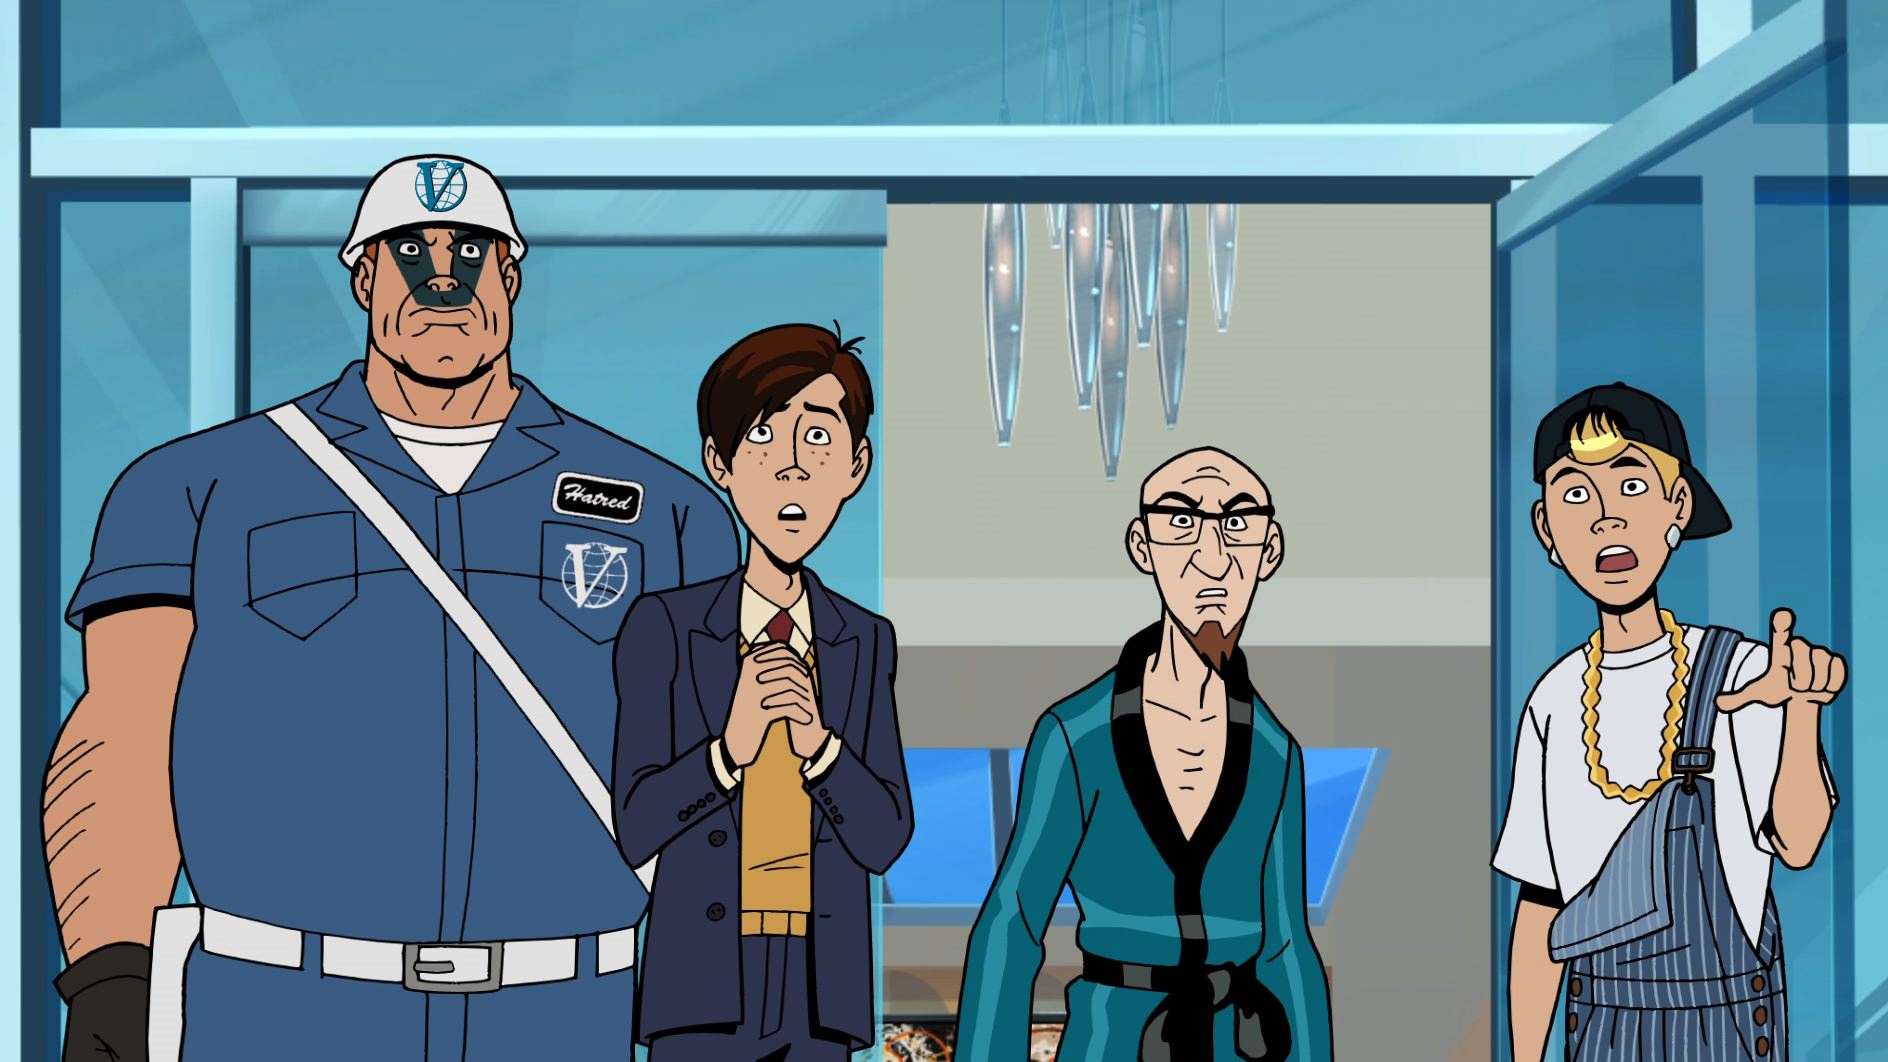 Venture brothers season 5 episode 2 torrent armentrout lux series torrent